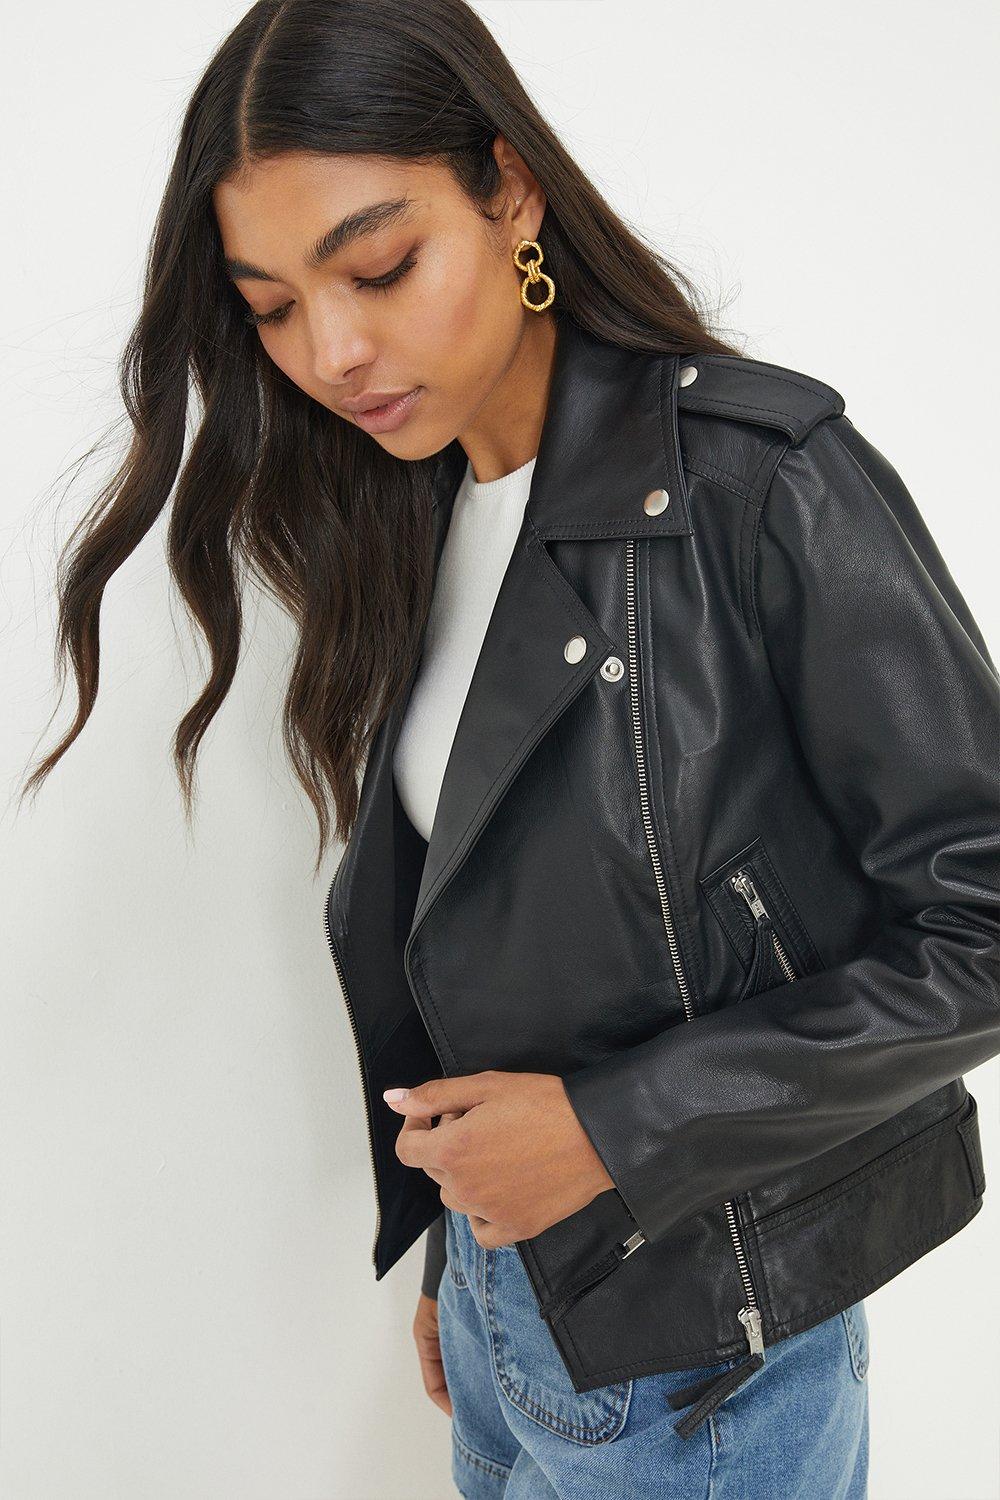 Women’s Boxy Cropped Real Leather Jacket - black - L